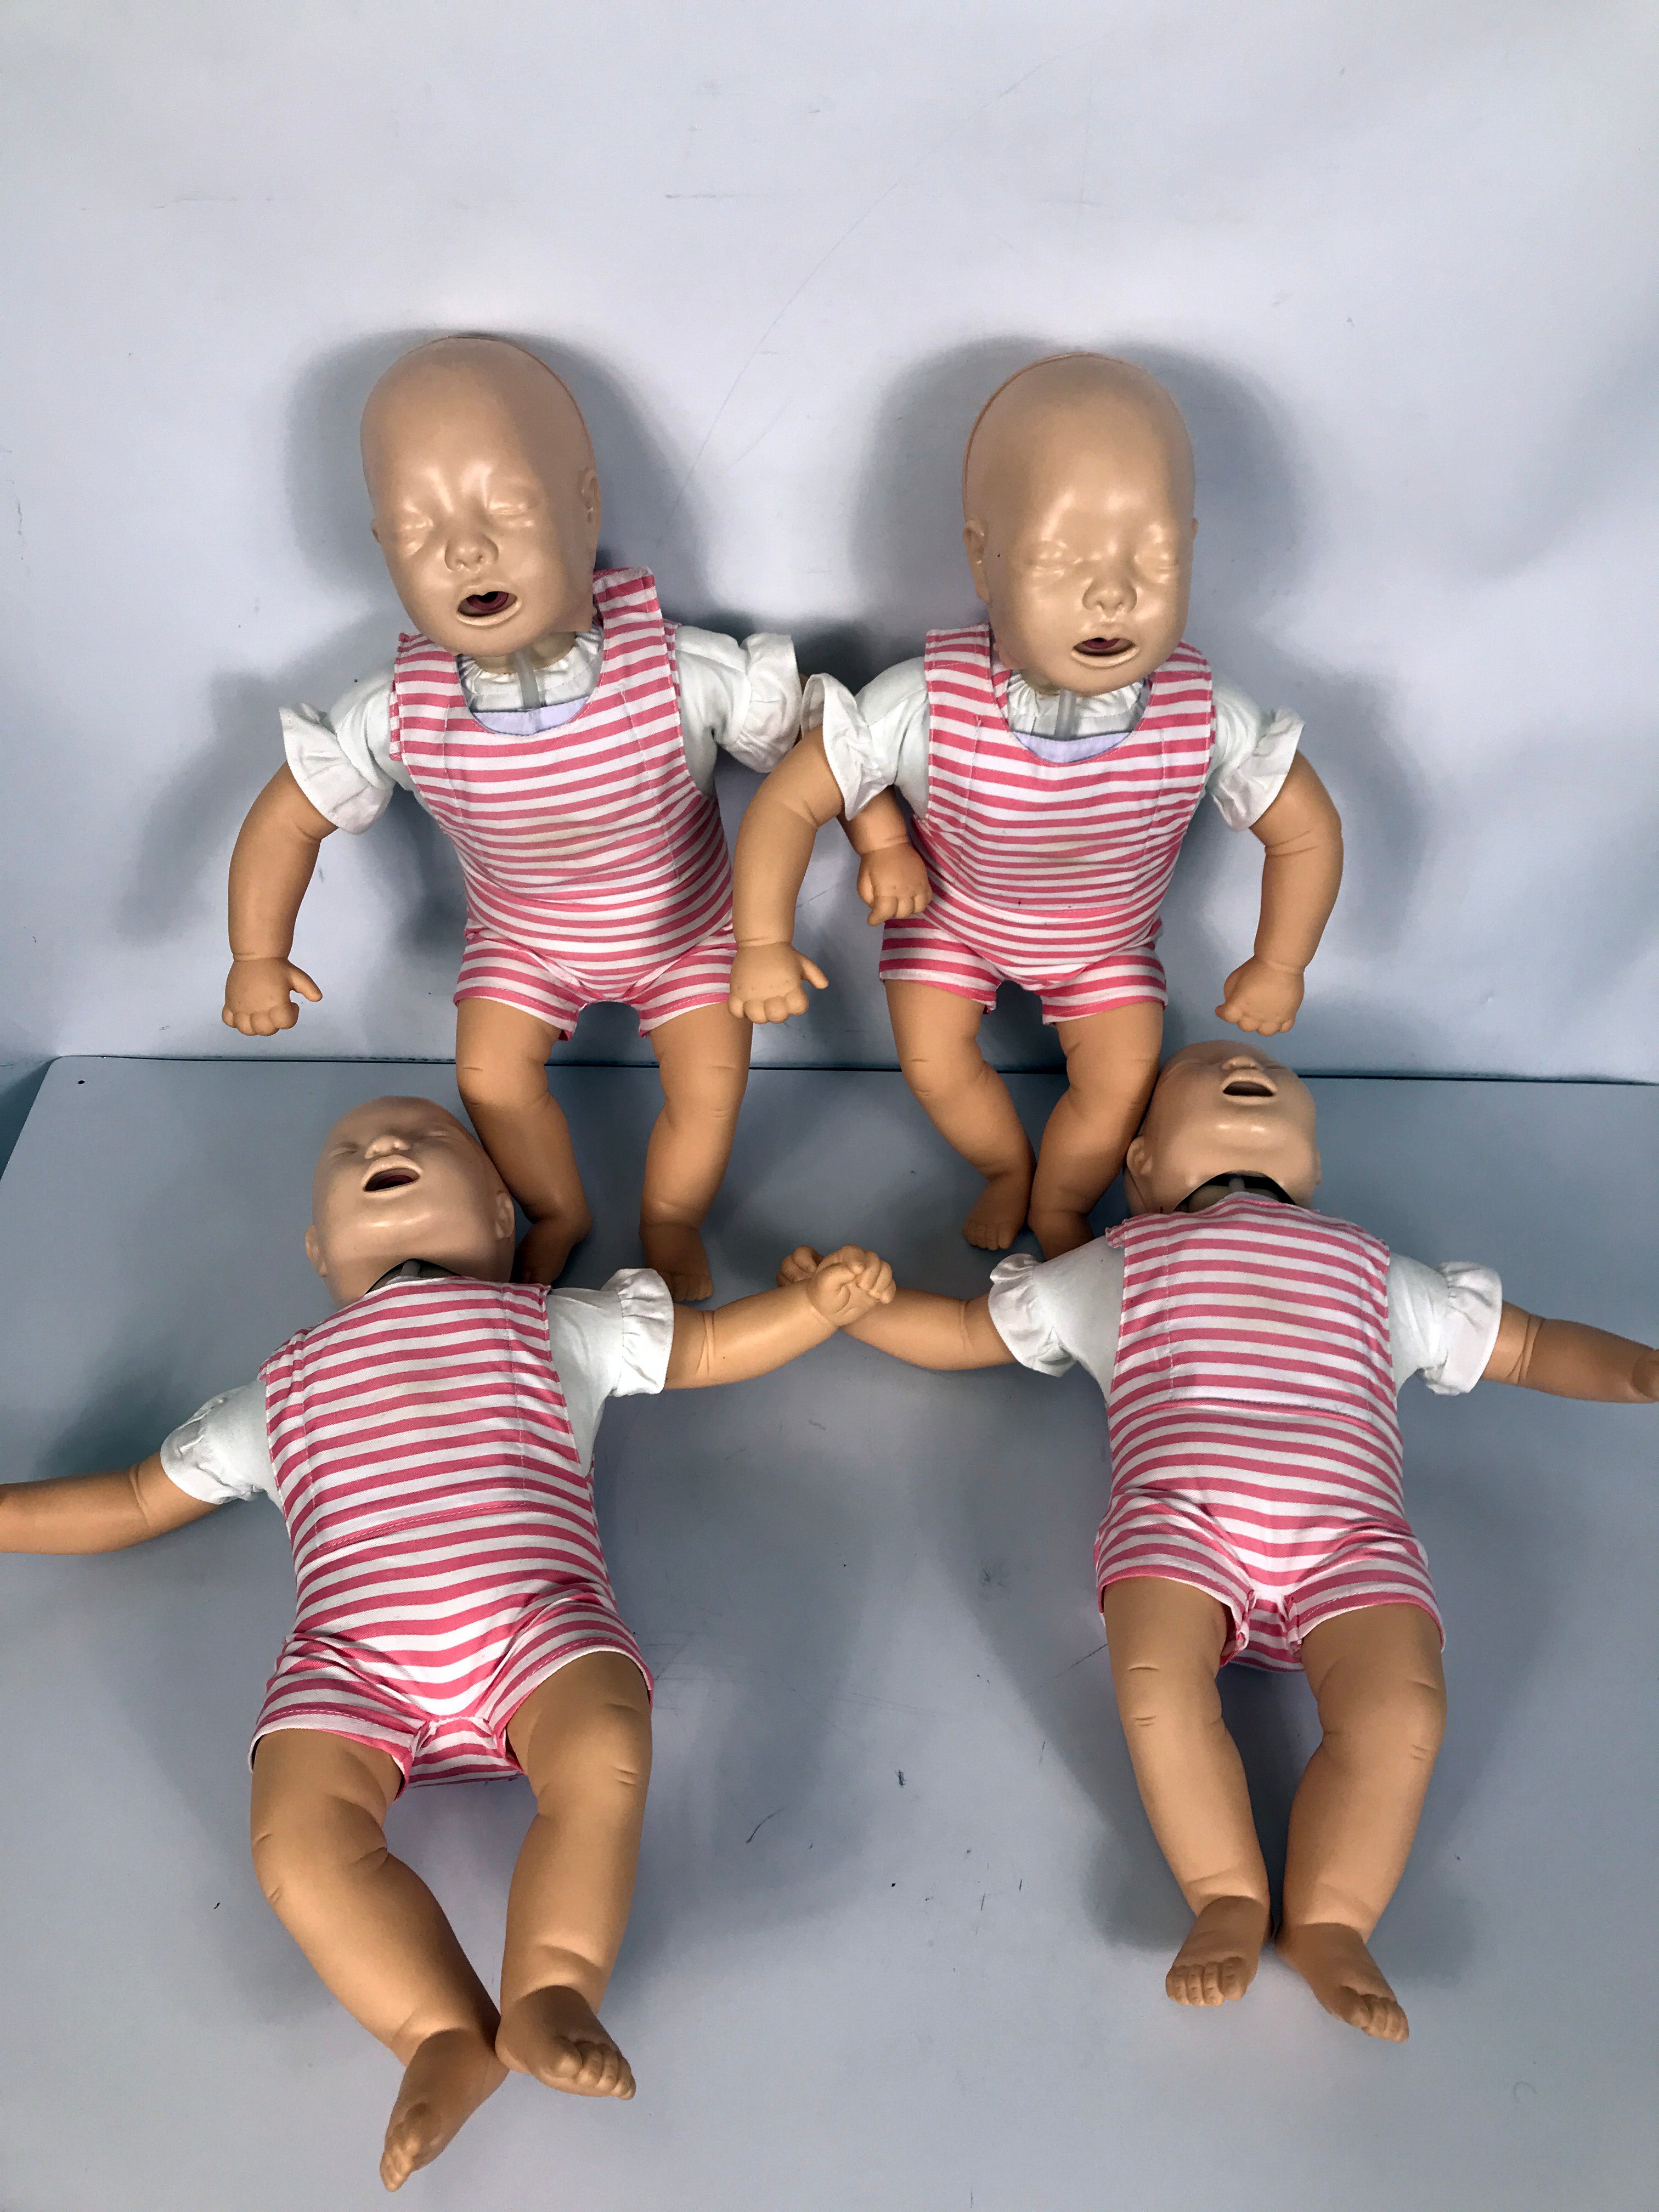 4 Laerdal Baby Anne Infant CPR Training Manikins with Bag and Extras